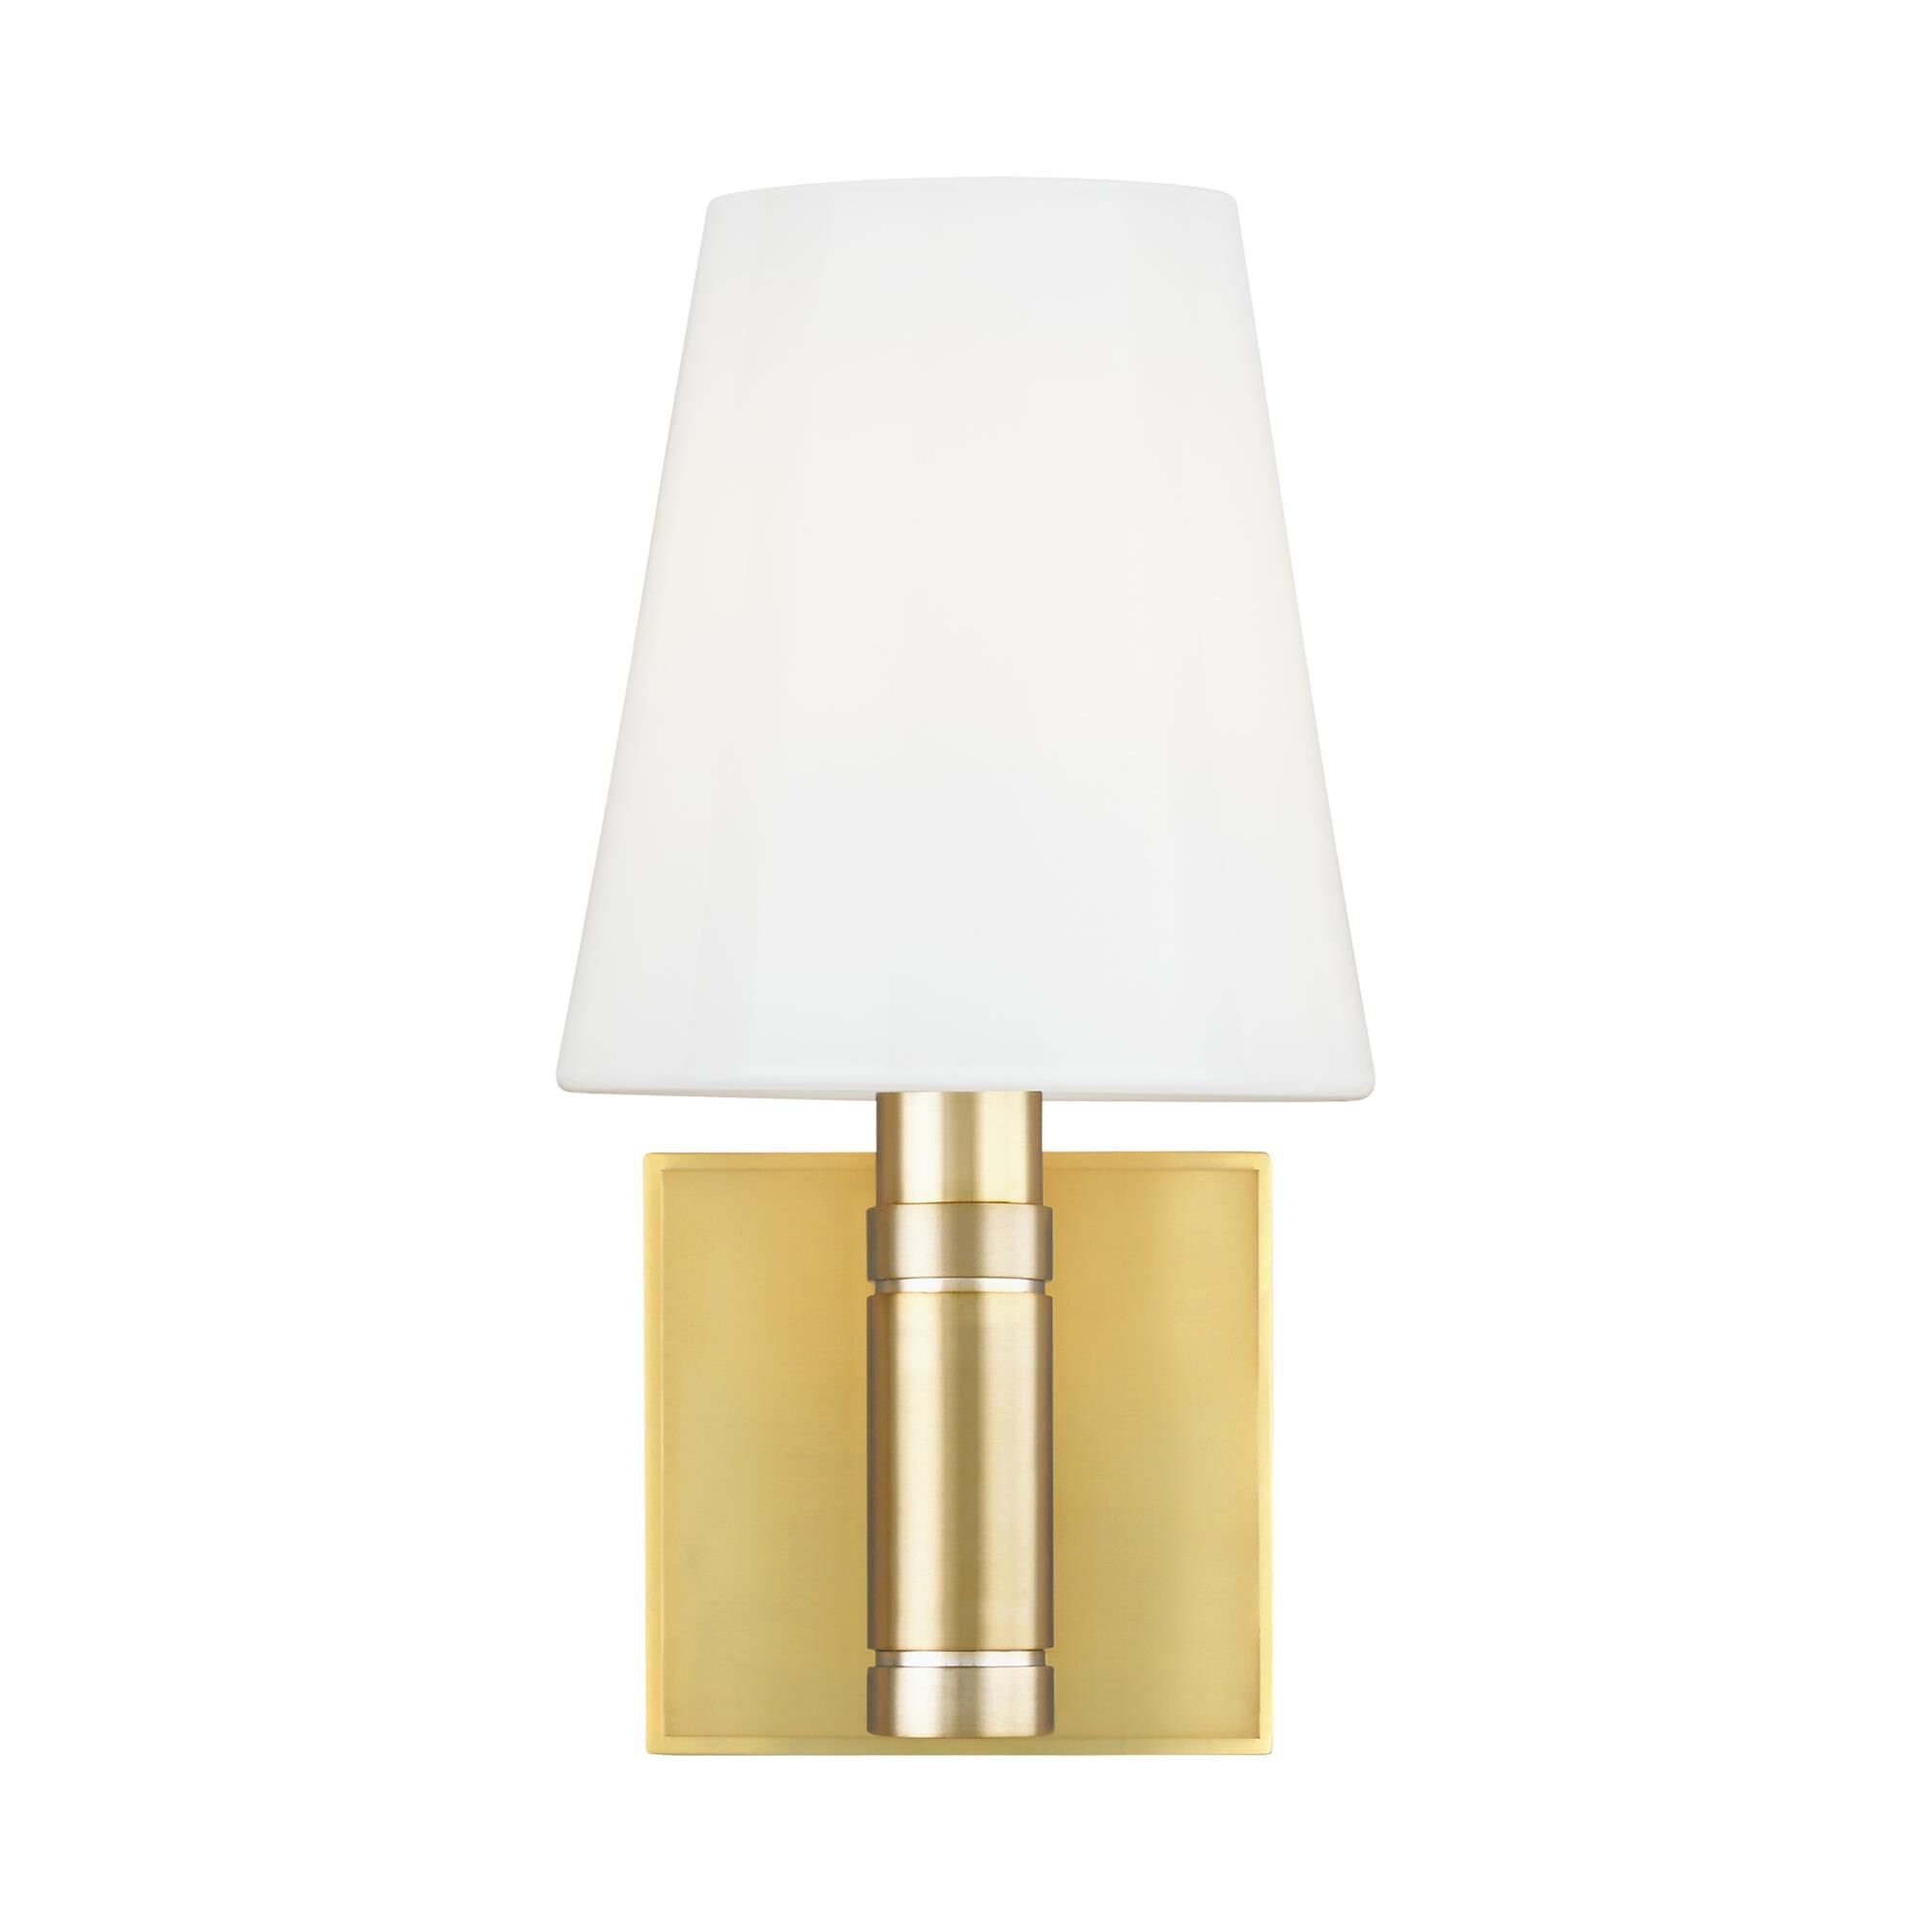 Visual Comfort Studio Collection Thomas O'Brien Beckham Classic 10 Inch Wall Sconce | 1800 Lighting